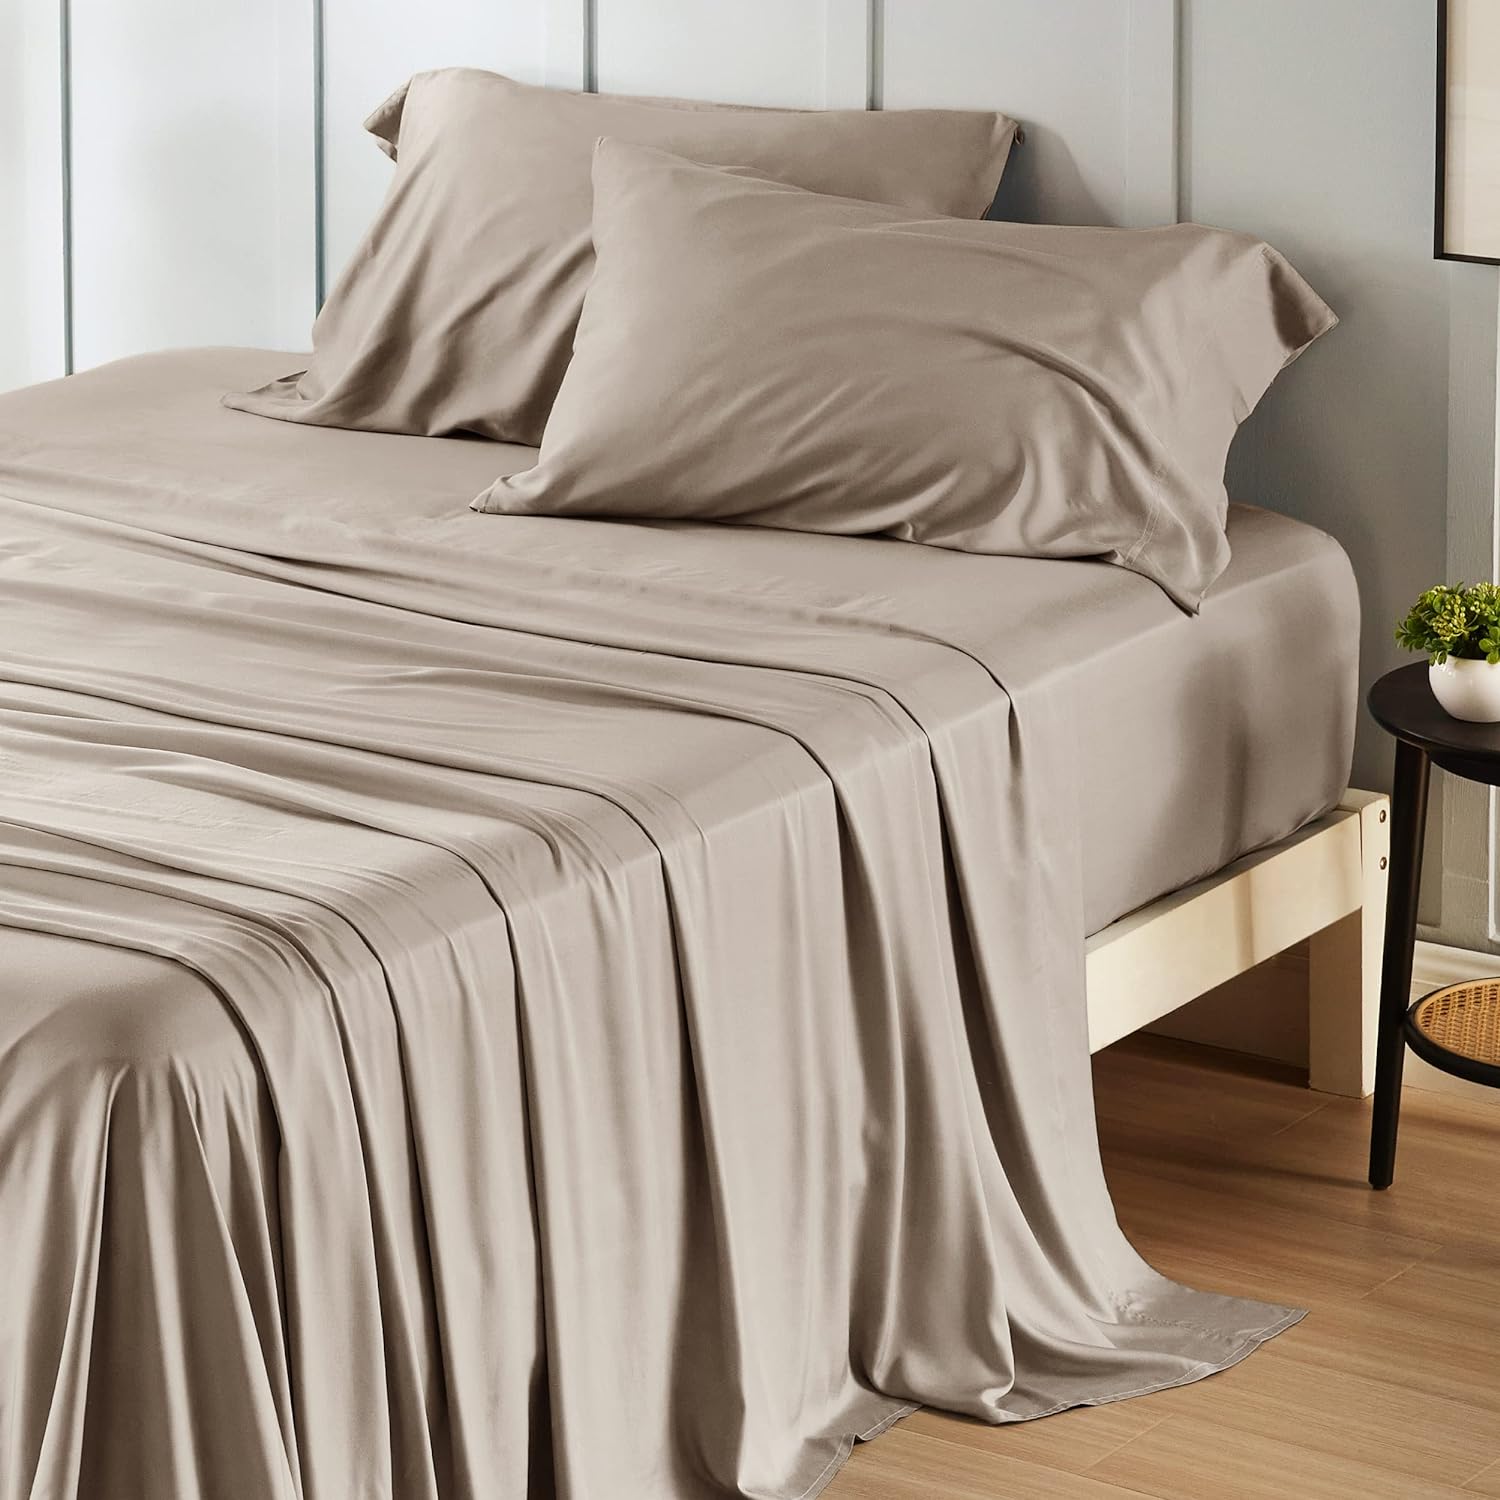 Hotel Luxury Silky Bedding Sheets And Pillowcases Sets